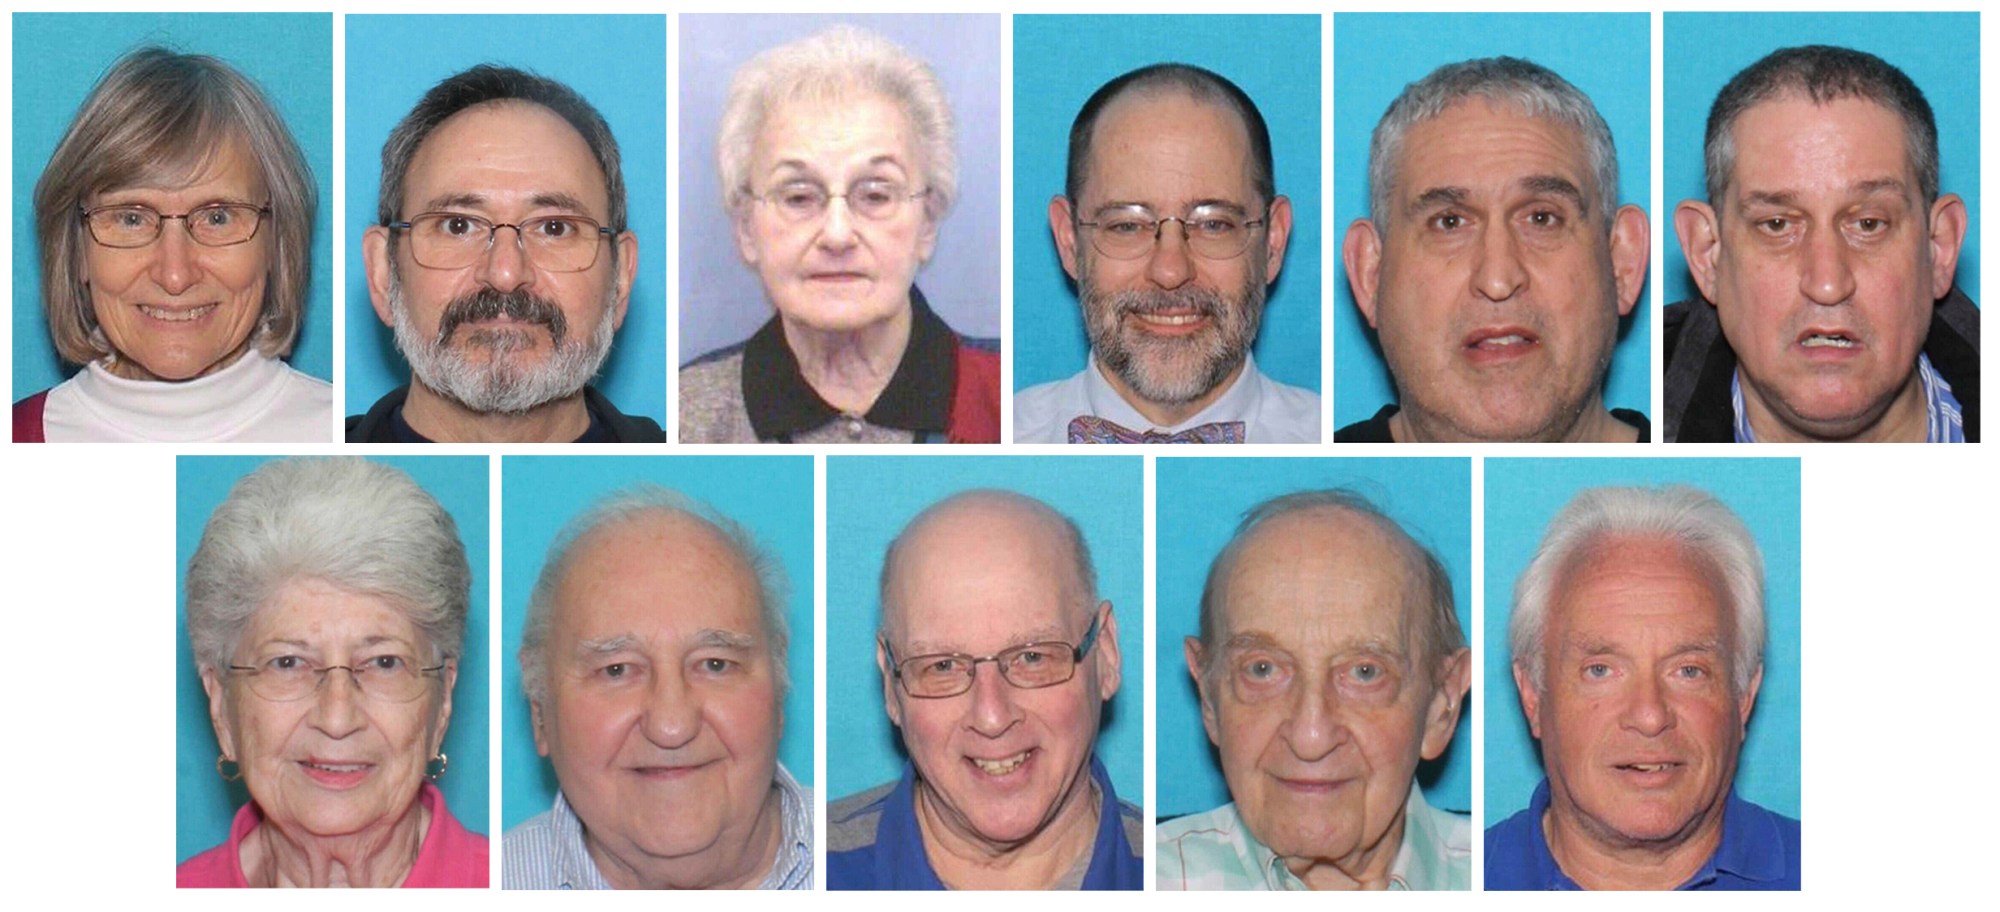 FILE - In this combo image made from photos provided by the United States District Court Western District of Pennsylvania are the victims of the Oct. 27, 2018, assault on the Tree of Life synagogue in Pittsburgh.. top row, from left, Joyce Fienberg, Richard Gottfried, Rose Mallinger, Jerry Rabinowitz, Cecil Rosenthal, and David Rosenthal; bottom row, from left, Bernice Simon, Sylvan Simon, Dan Stein, Melvin Wax, and Irving Younger. Robert Bowers, a truck driver who shot and killed 11 worshippers at a Pittsburgh synagogue in the nation's deadliest attack on Jewish people, was found guilty, Friday, June 16, 2023. Bowers was tried on 63 criminal counts, including hate crimes resulting in death and obstruction of the free exercise of religion resulting in death. (United States District Court Western District of Pennsylvania via AP, File)